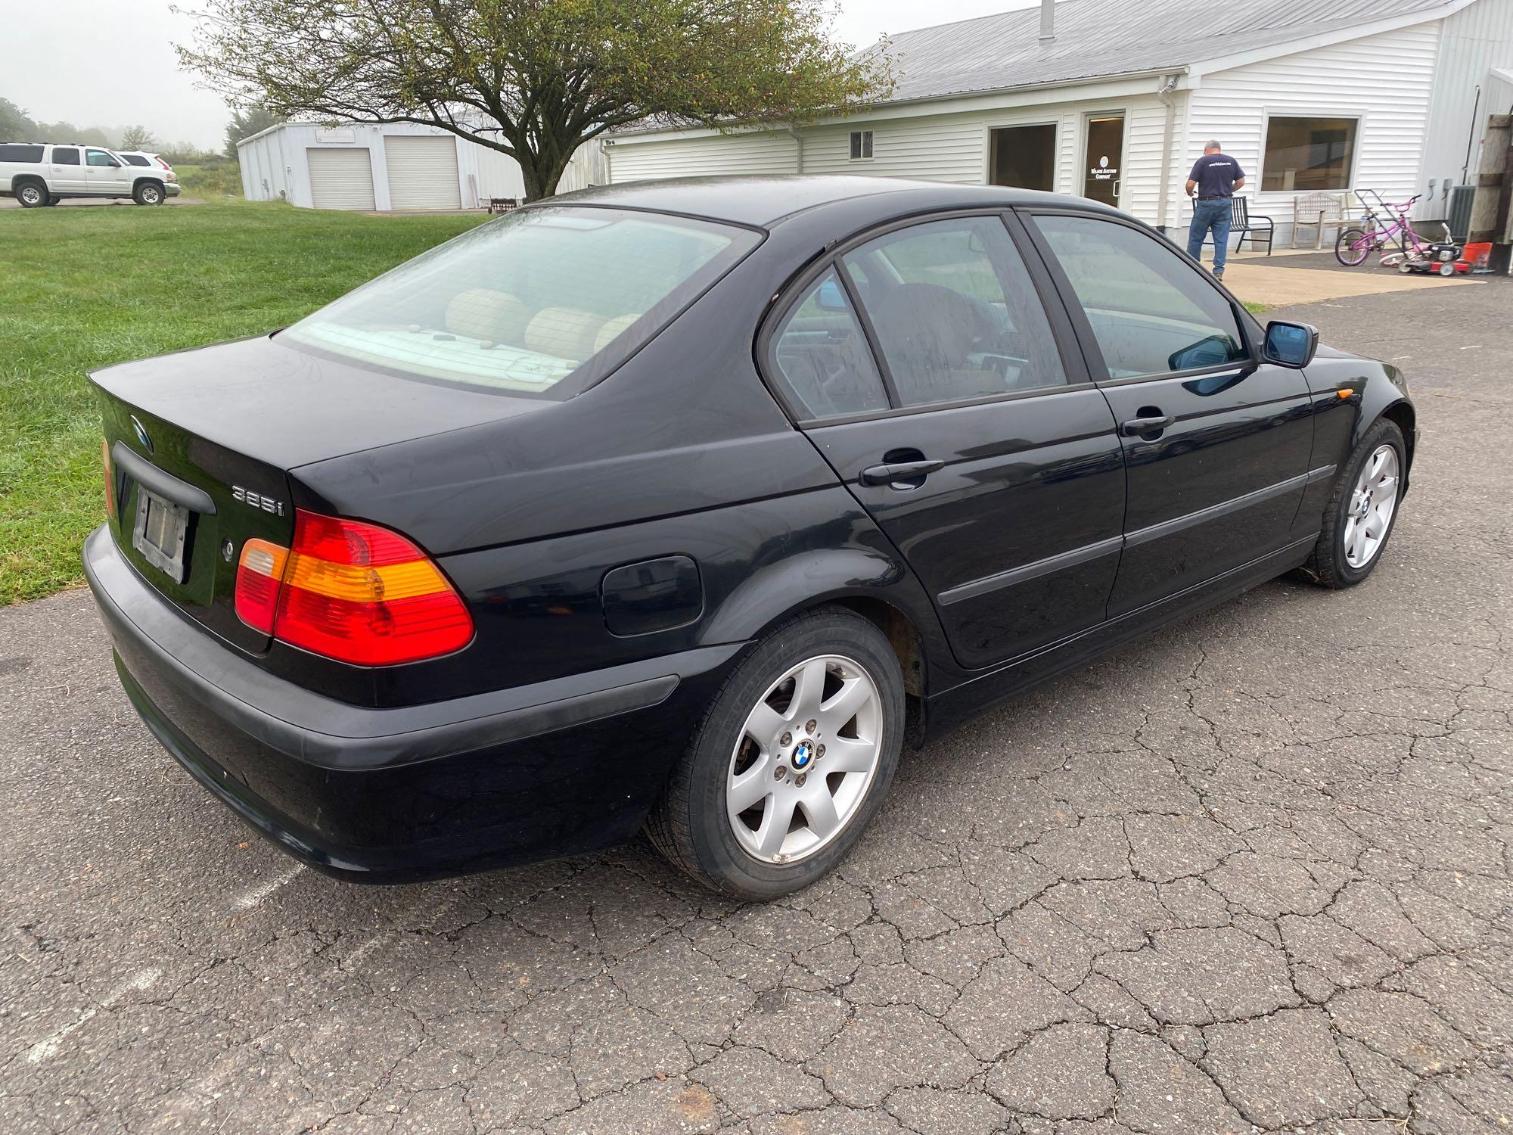 Image for 2004 BMW 325i, Per Seller Runs and Drives Like it Should, Needs Driver Window Regulator